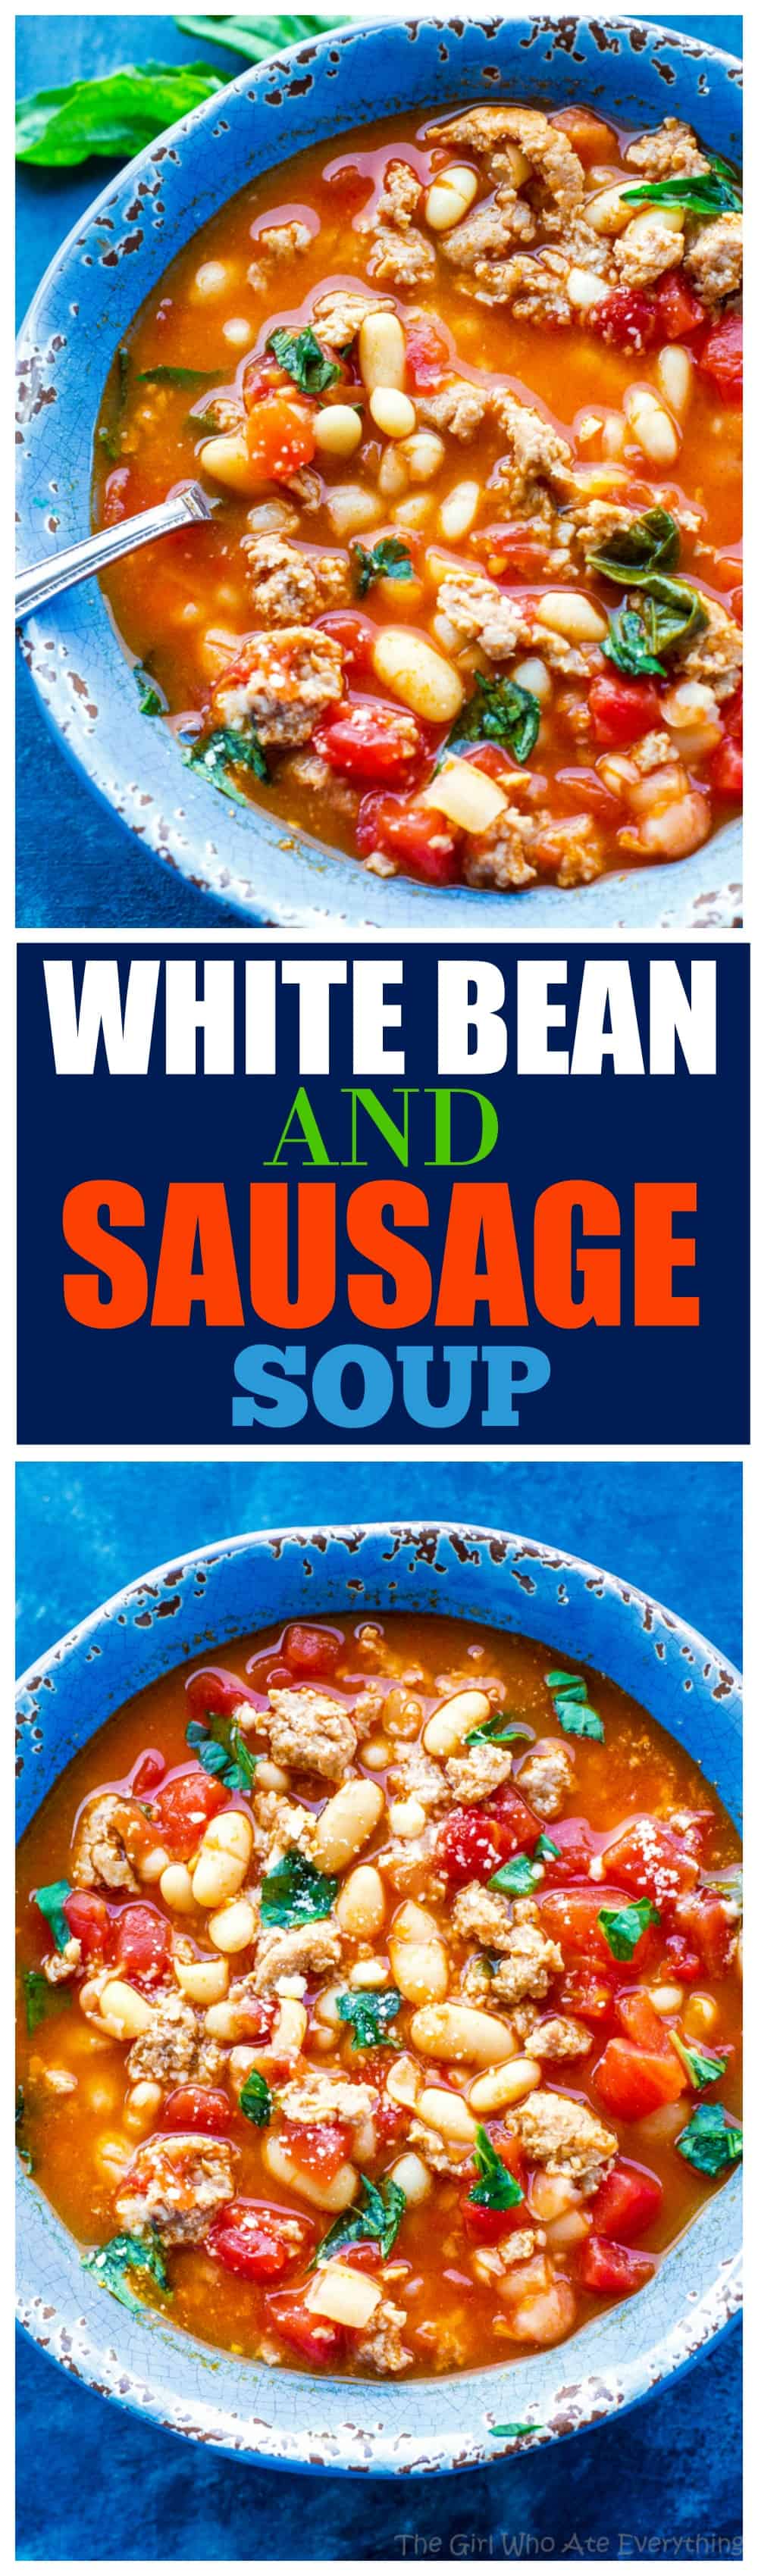 This White Bean and Sausage Soup is from my friend Steph only has six ingredients and has spicy sausage, basil, tomatoes, and beans! #white #bean #sausage #soup #recipe #easy #dinner